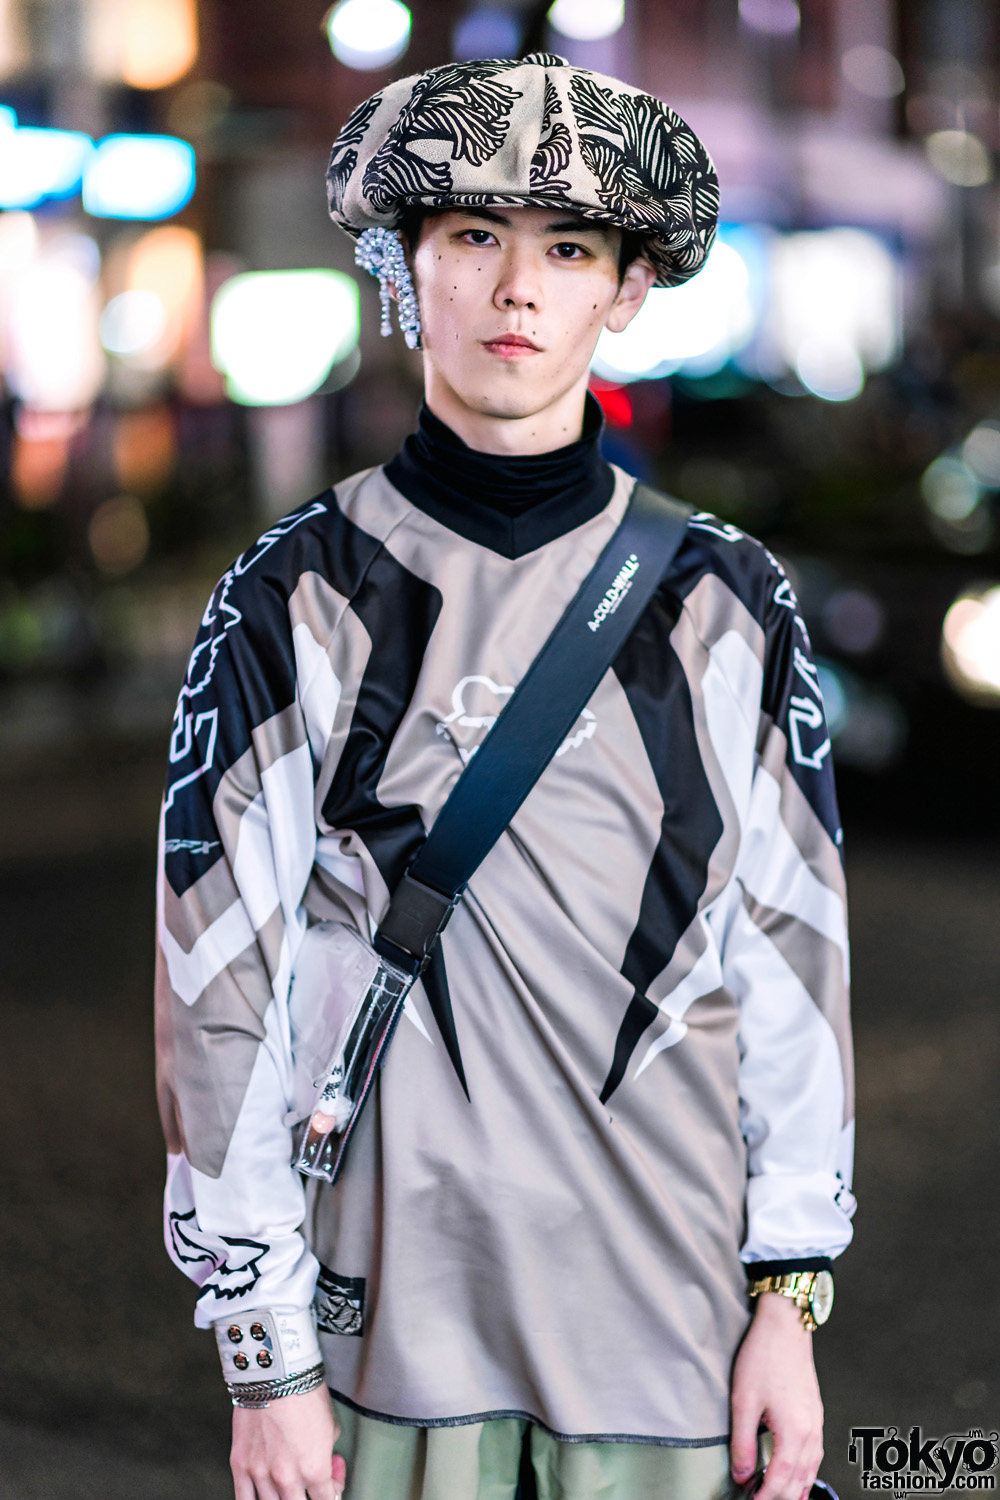 Christopher Nemeth Streetwear Style w/ Newsboy Cap, Rope Print Badges,  White Shirt, Drop Crotch Overalls & Leather Wingtip Shoes – Tokyo Fashion